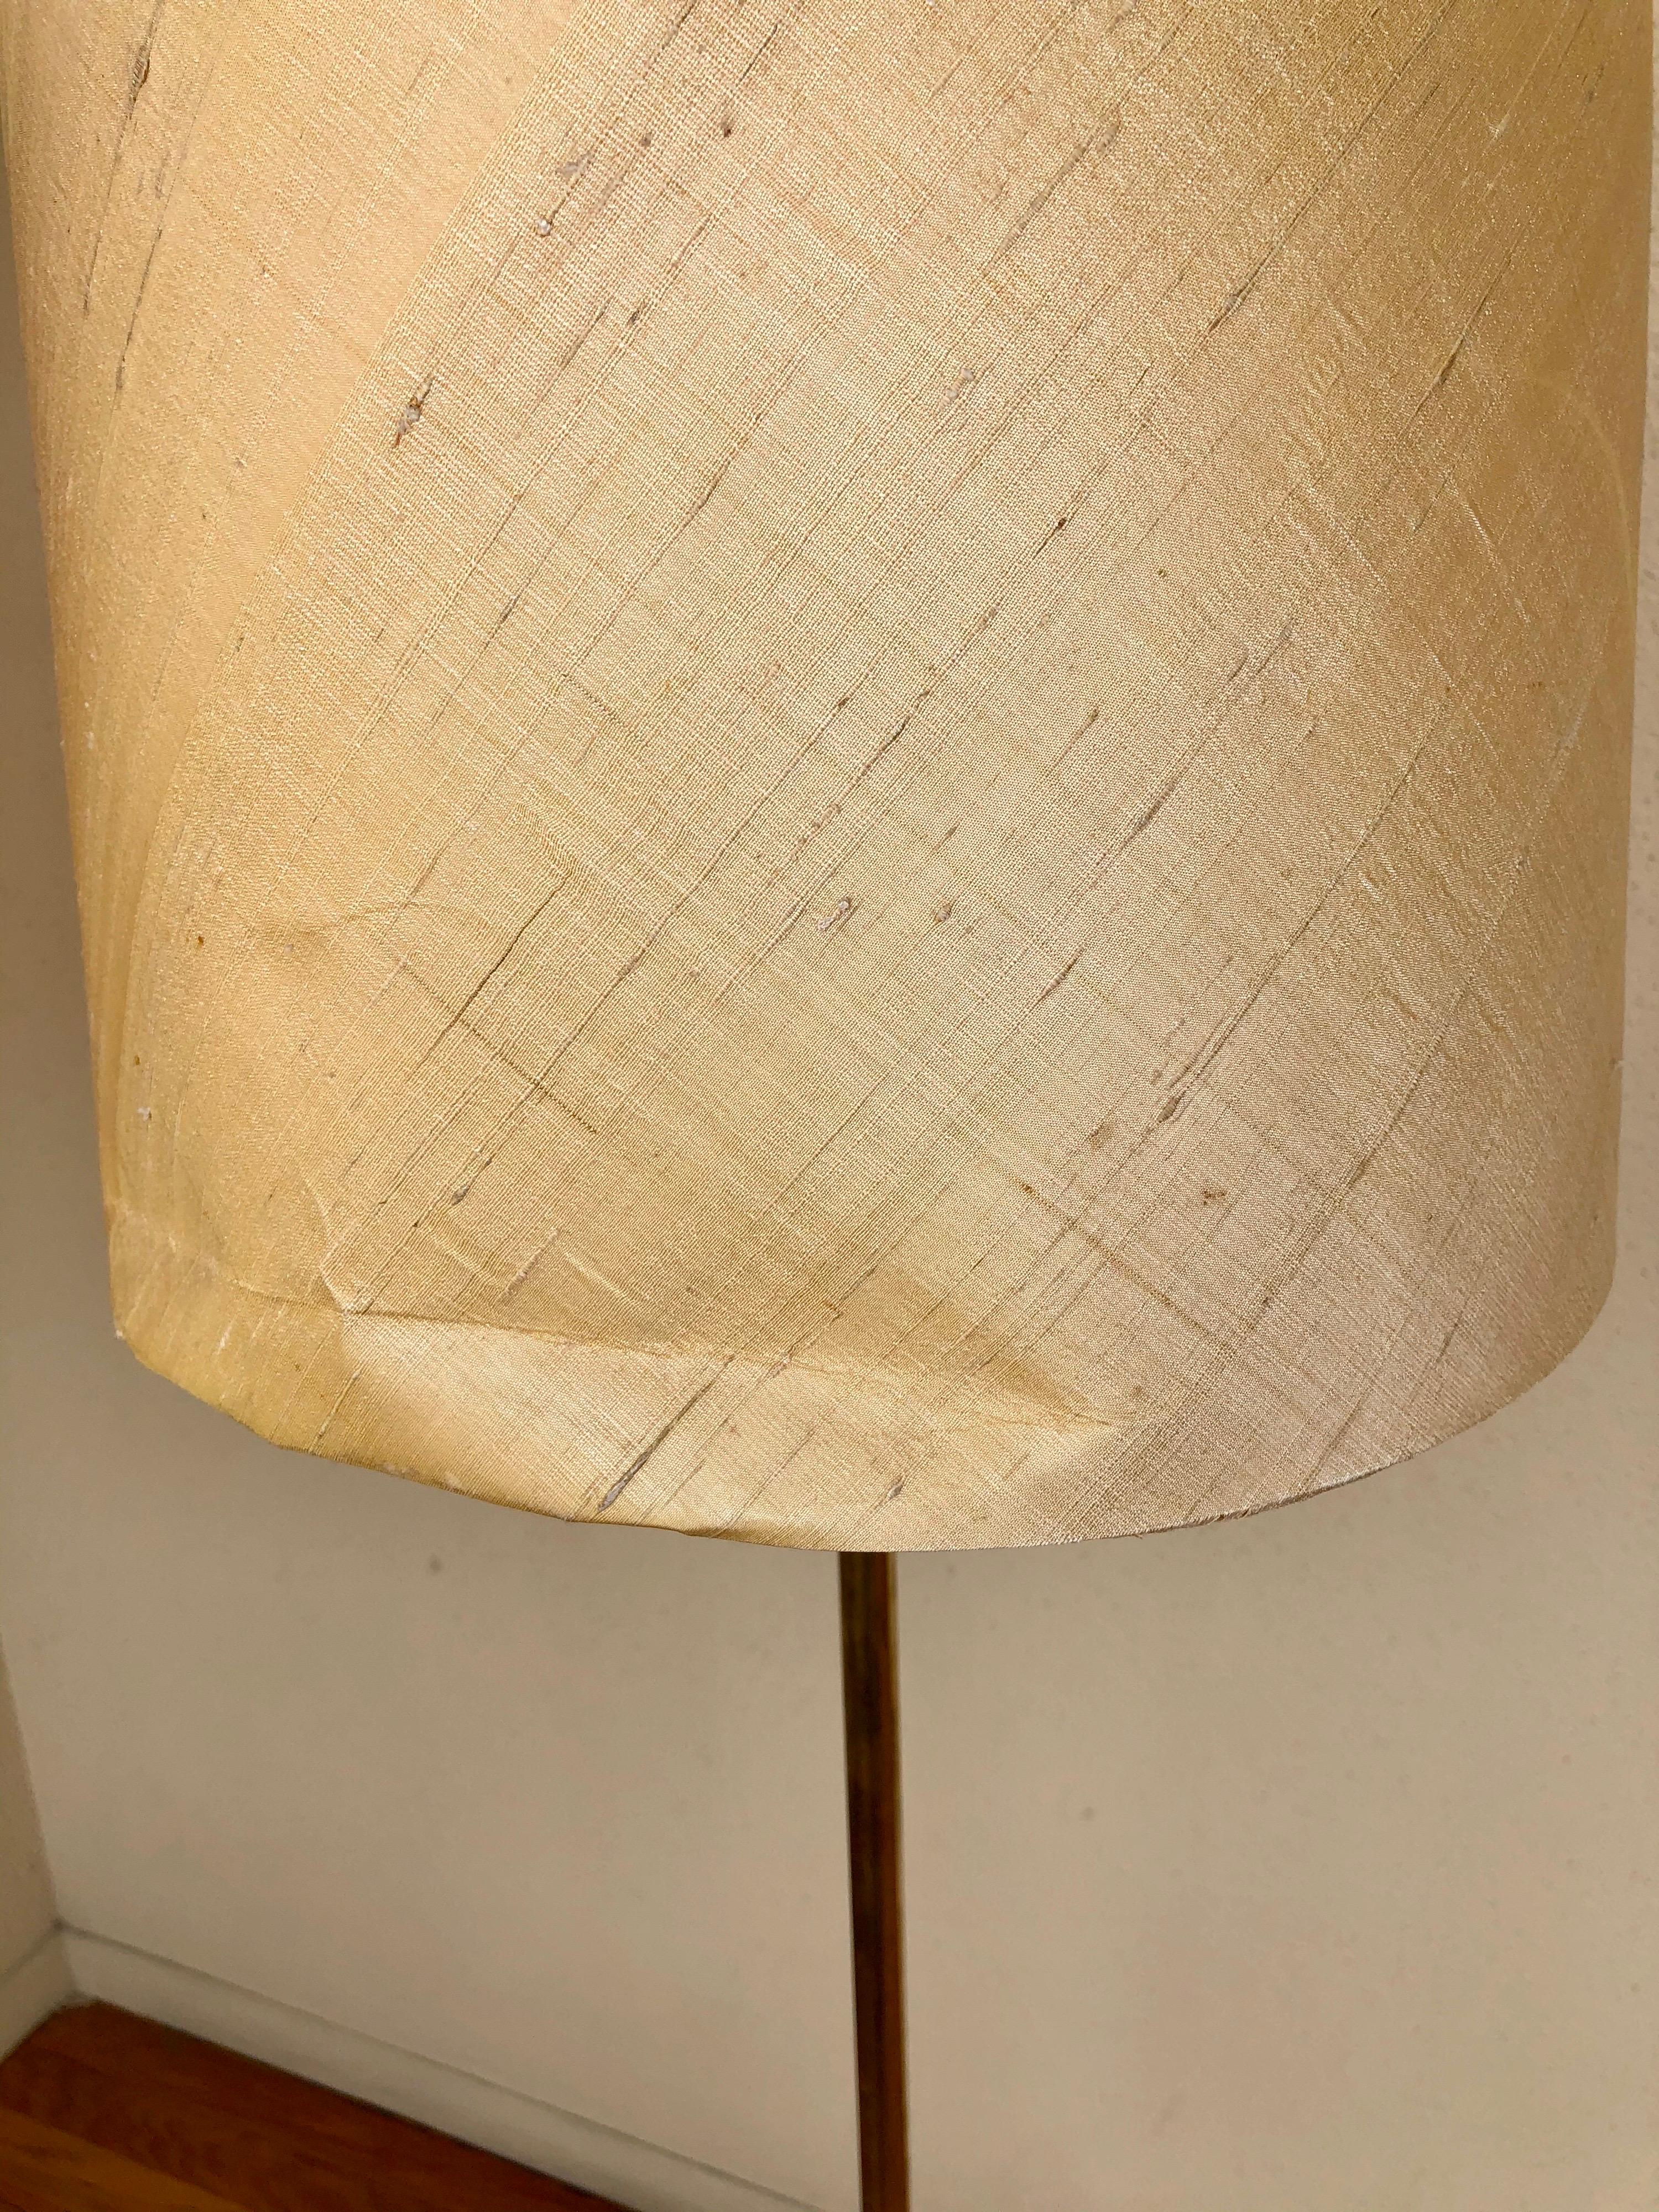 Pair of Hans-Agne Jakobsson Polished Brass Floor Lamps In Good Condition For Sale In San Diego, CA